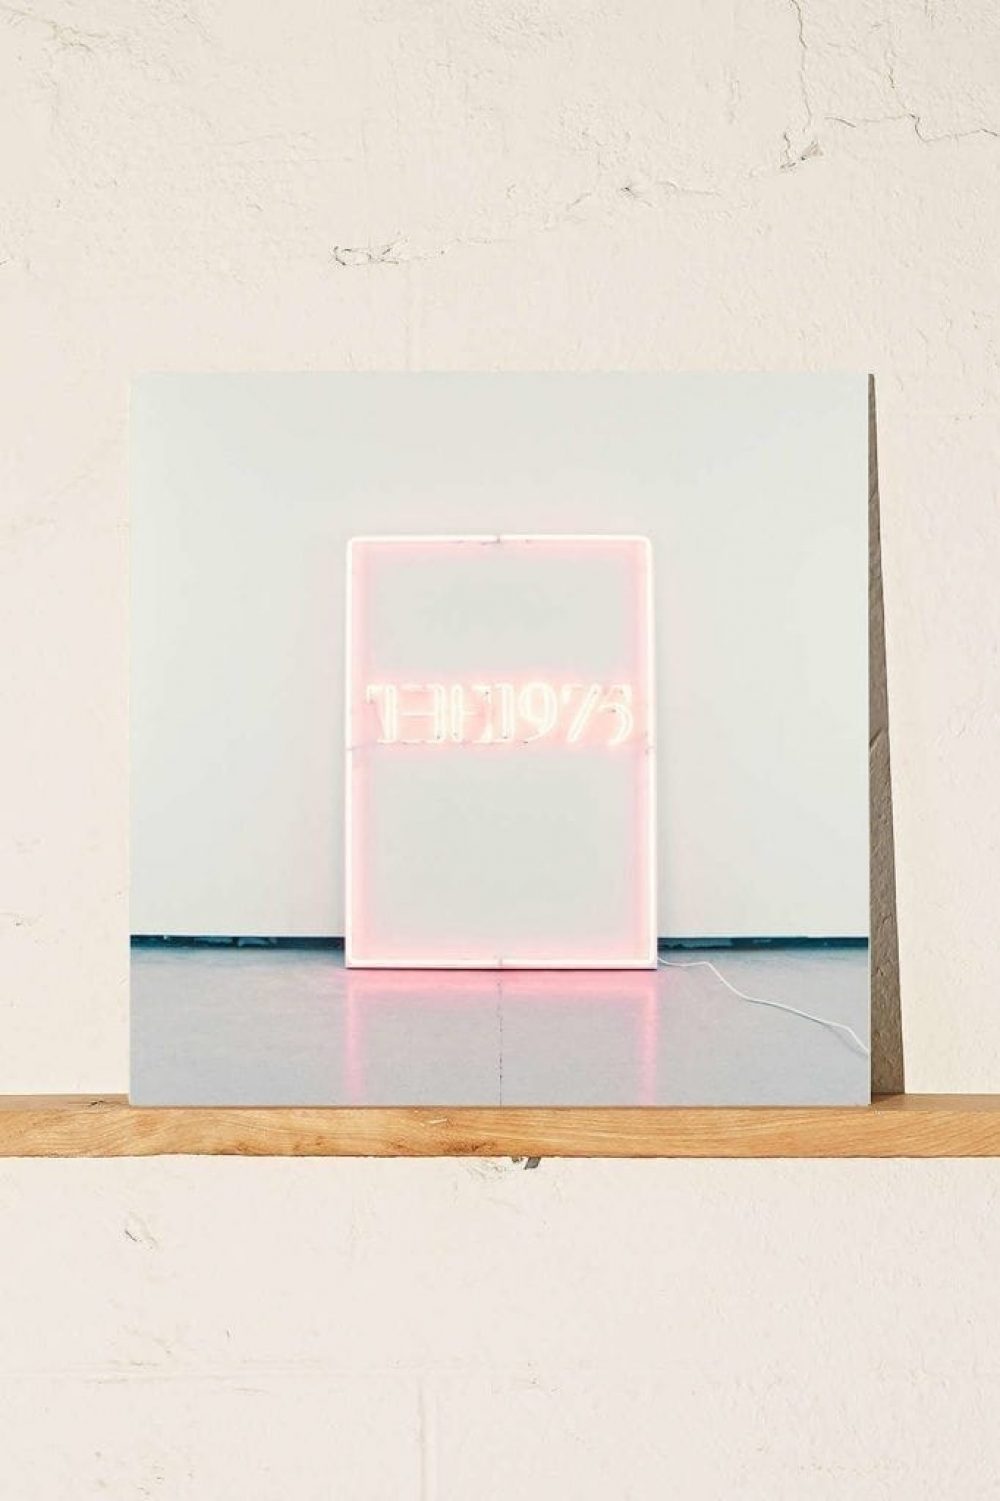 Vinyl for I Like It When You Sleep by The 1975